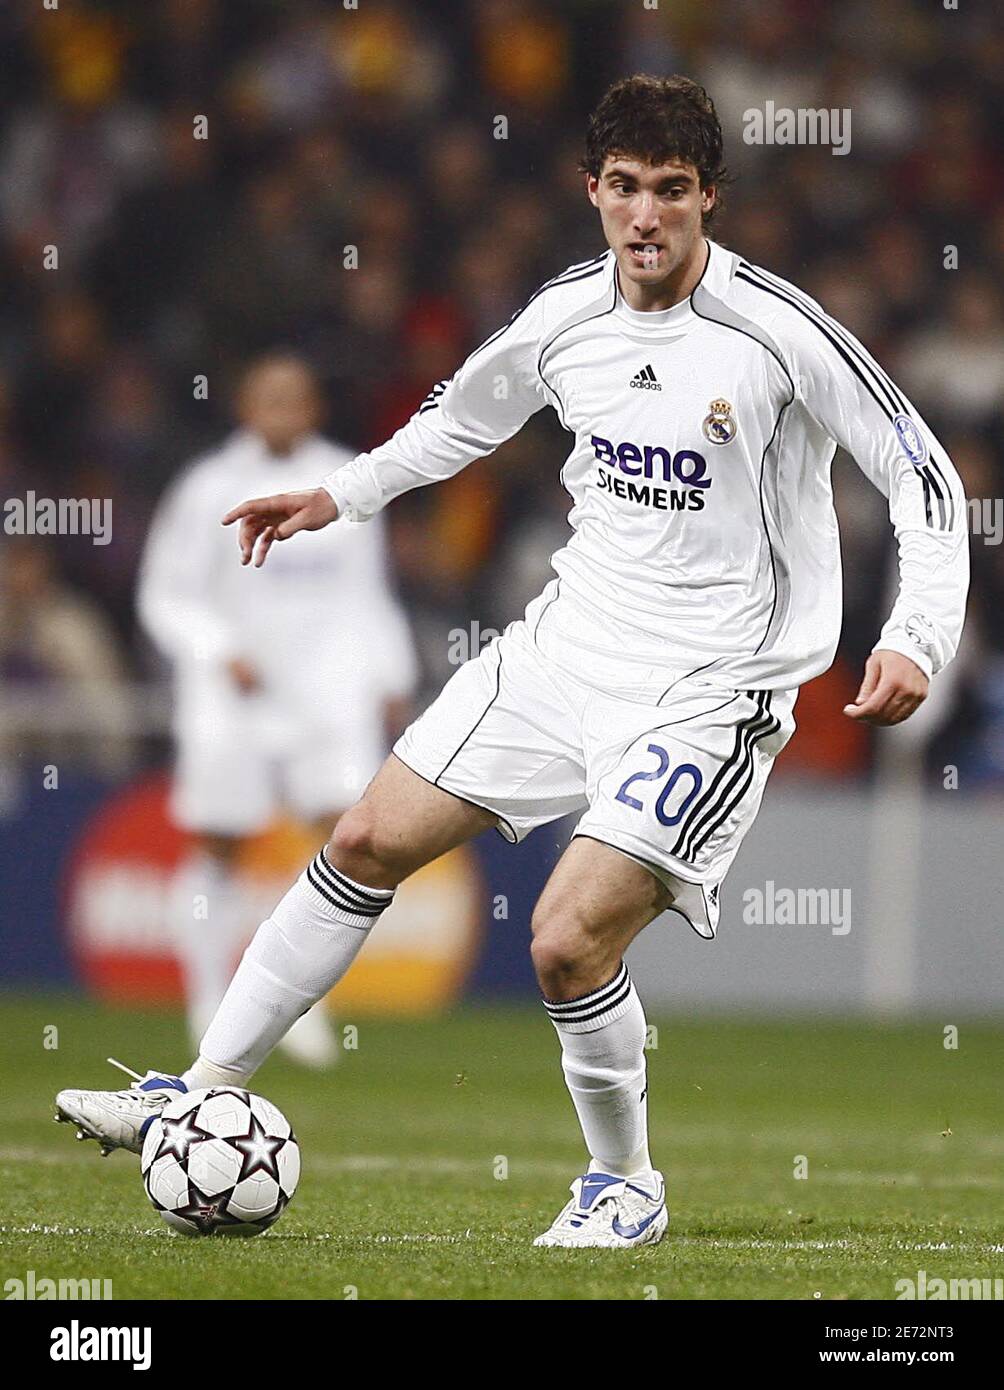 Real Madrid's Gonzalo Higuain in action during the Champions League first  knockout round, first leg soccer match, Real Madrid vs Bayern Munich in  Madrid. Real Madrid won 3-2. Photo by Christian Liewig/ABACAPRESS.COM